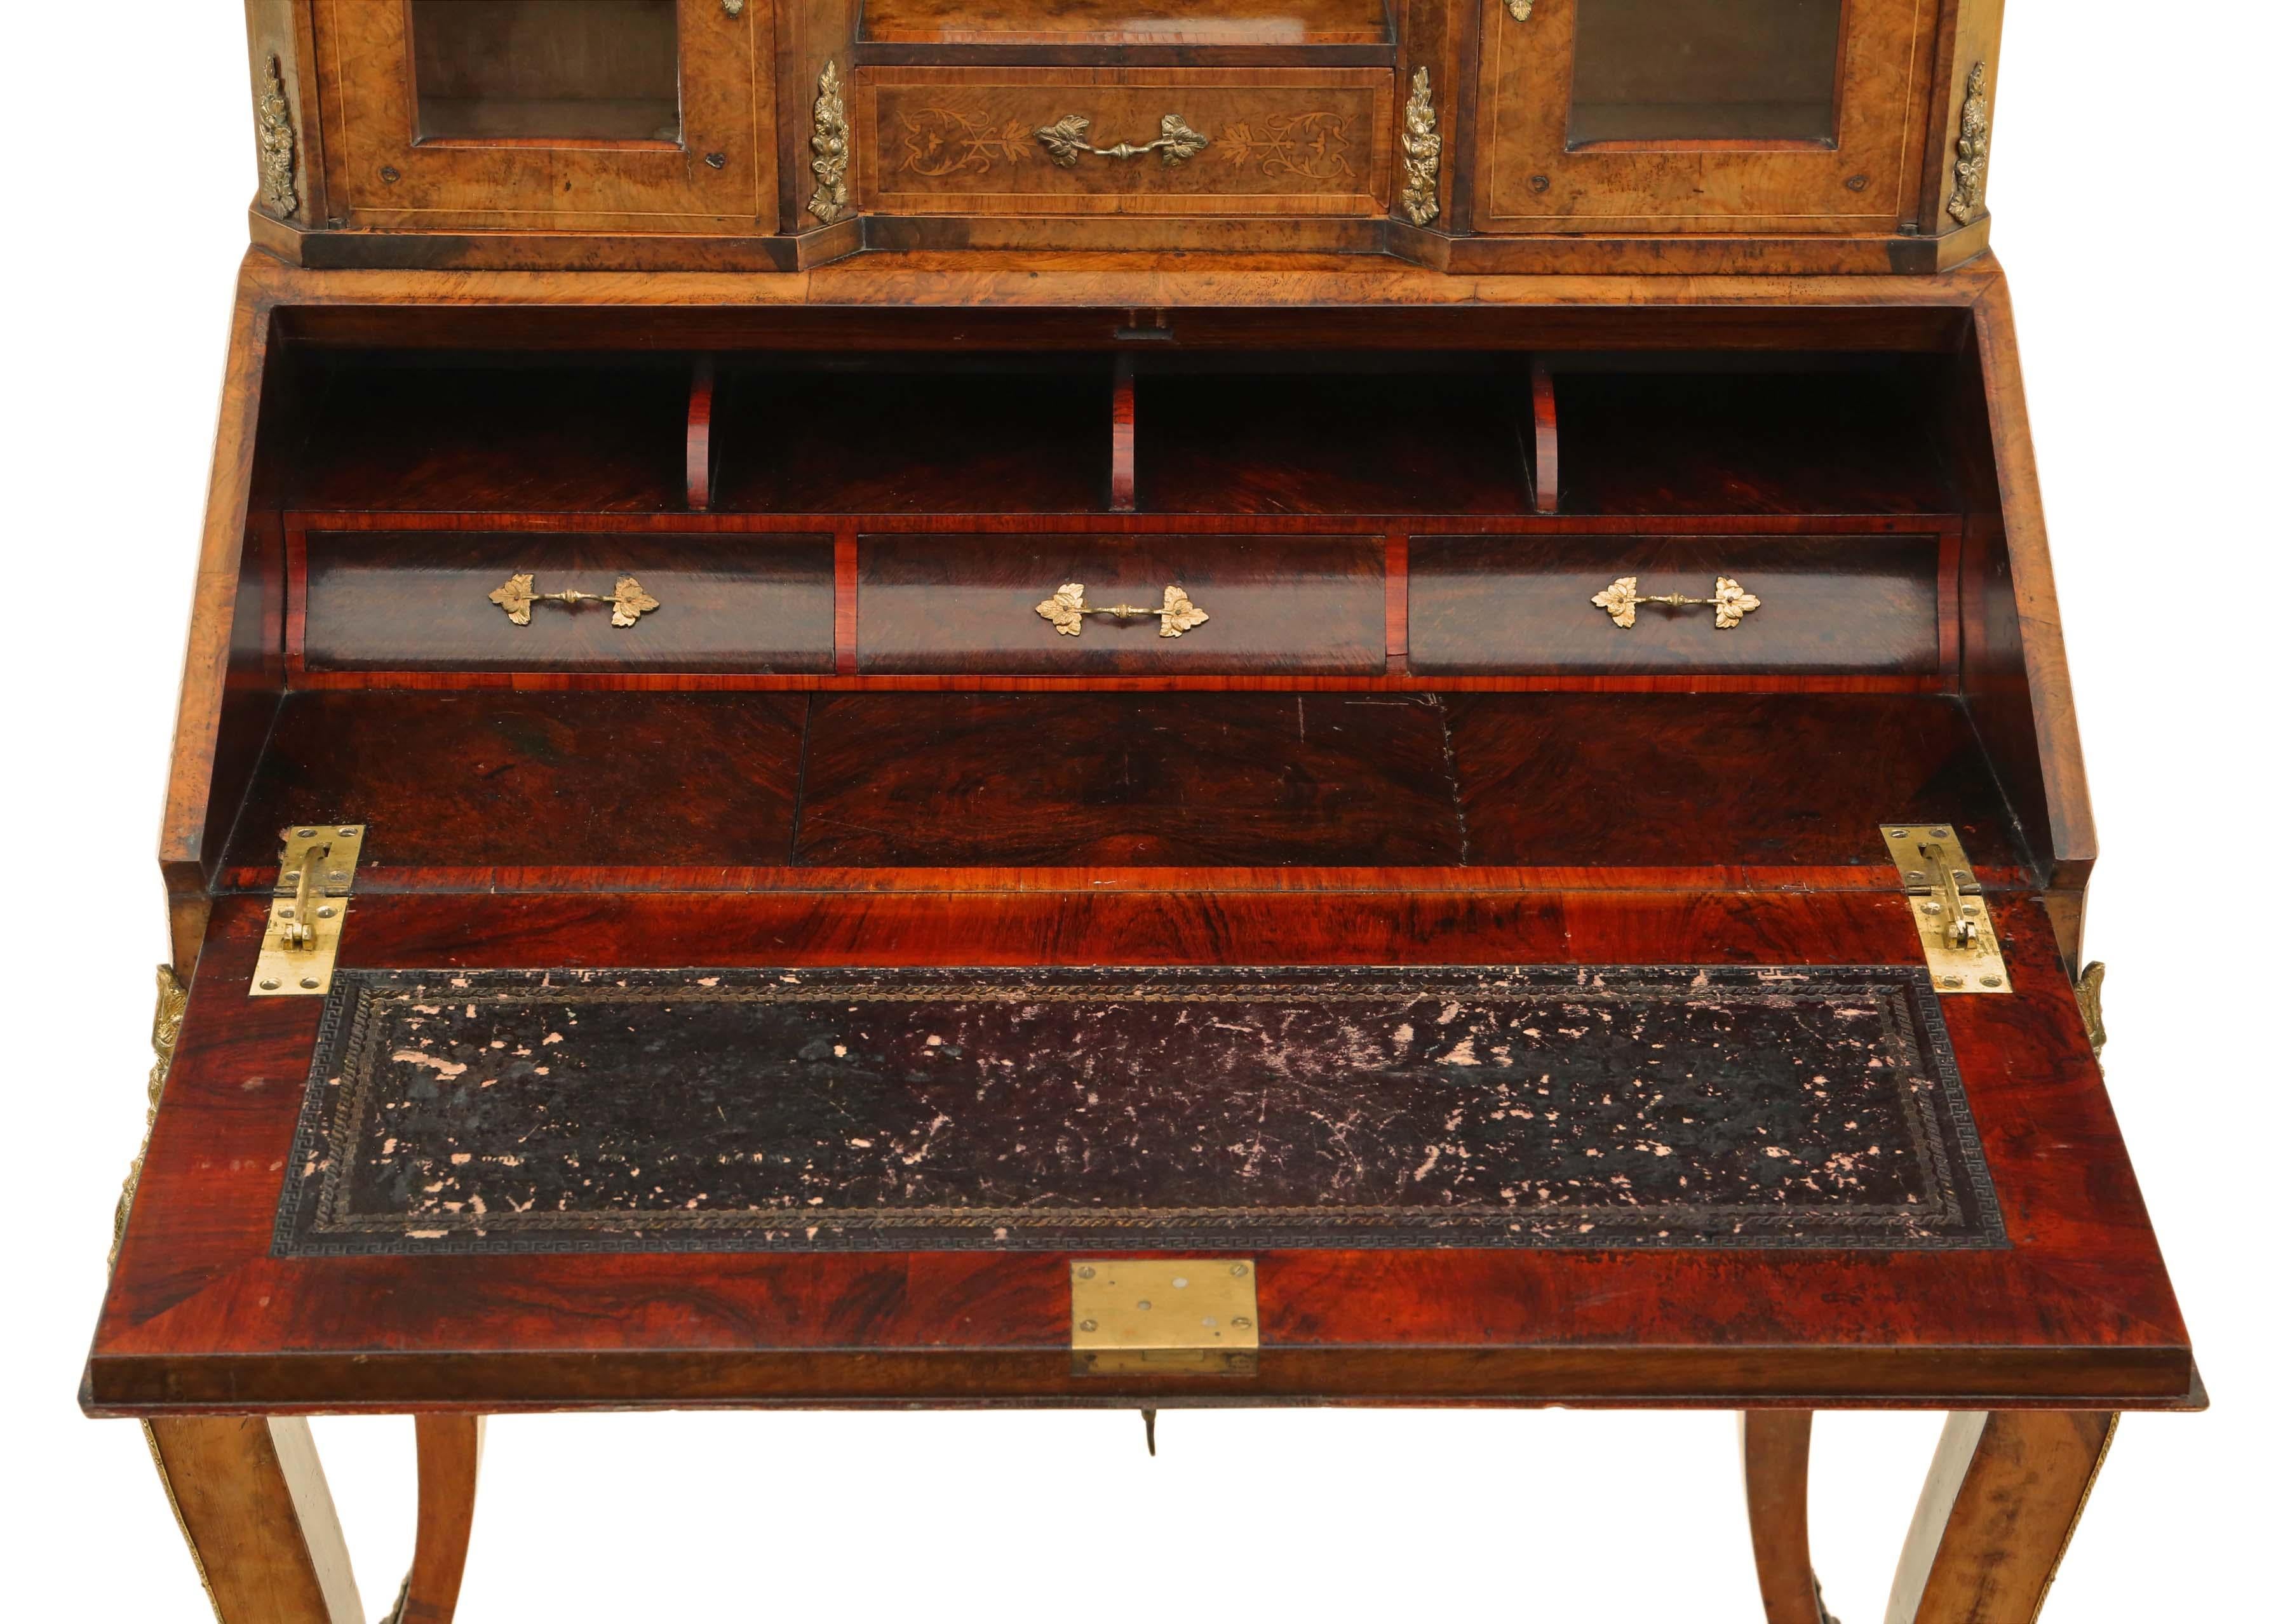 Antique fine quality inlaid burr walnut Bonheur de Jour bureau desk writing table 19th Century. Veneer on mahogany construction, very heavy and strong.

Drop well bureau compartment with patinated tooled leather writing surface. The mirrored glass